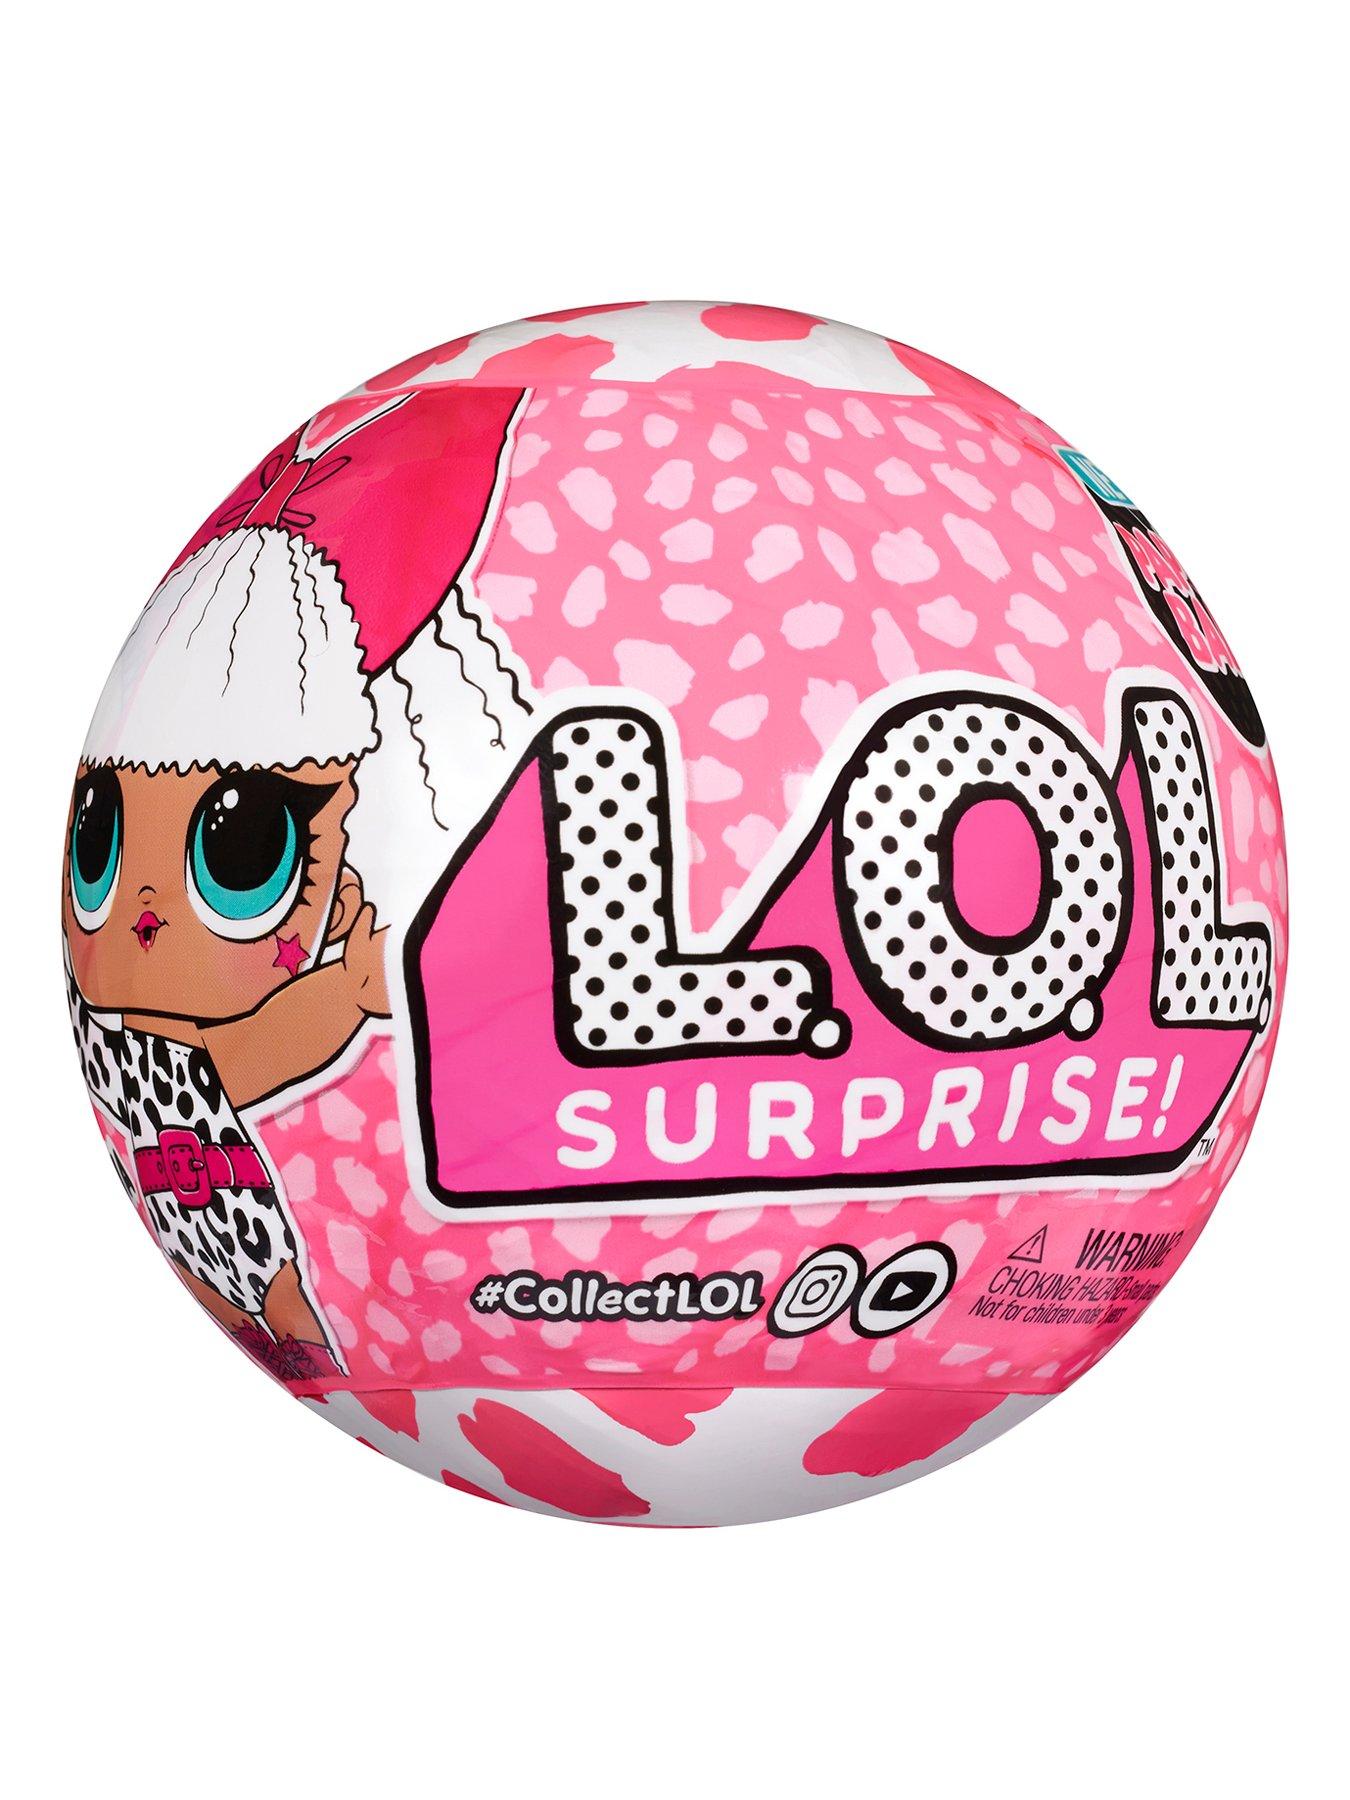 Surprise Pet Ball LOL SURPRISE DOLL KICK SCOOTER FOLDS 24" NEW EXCLUSIVE MODEL 